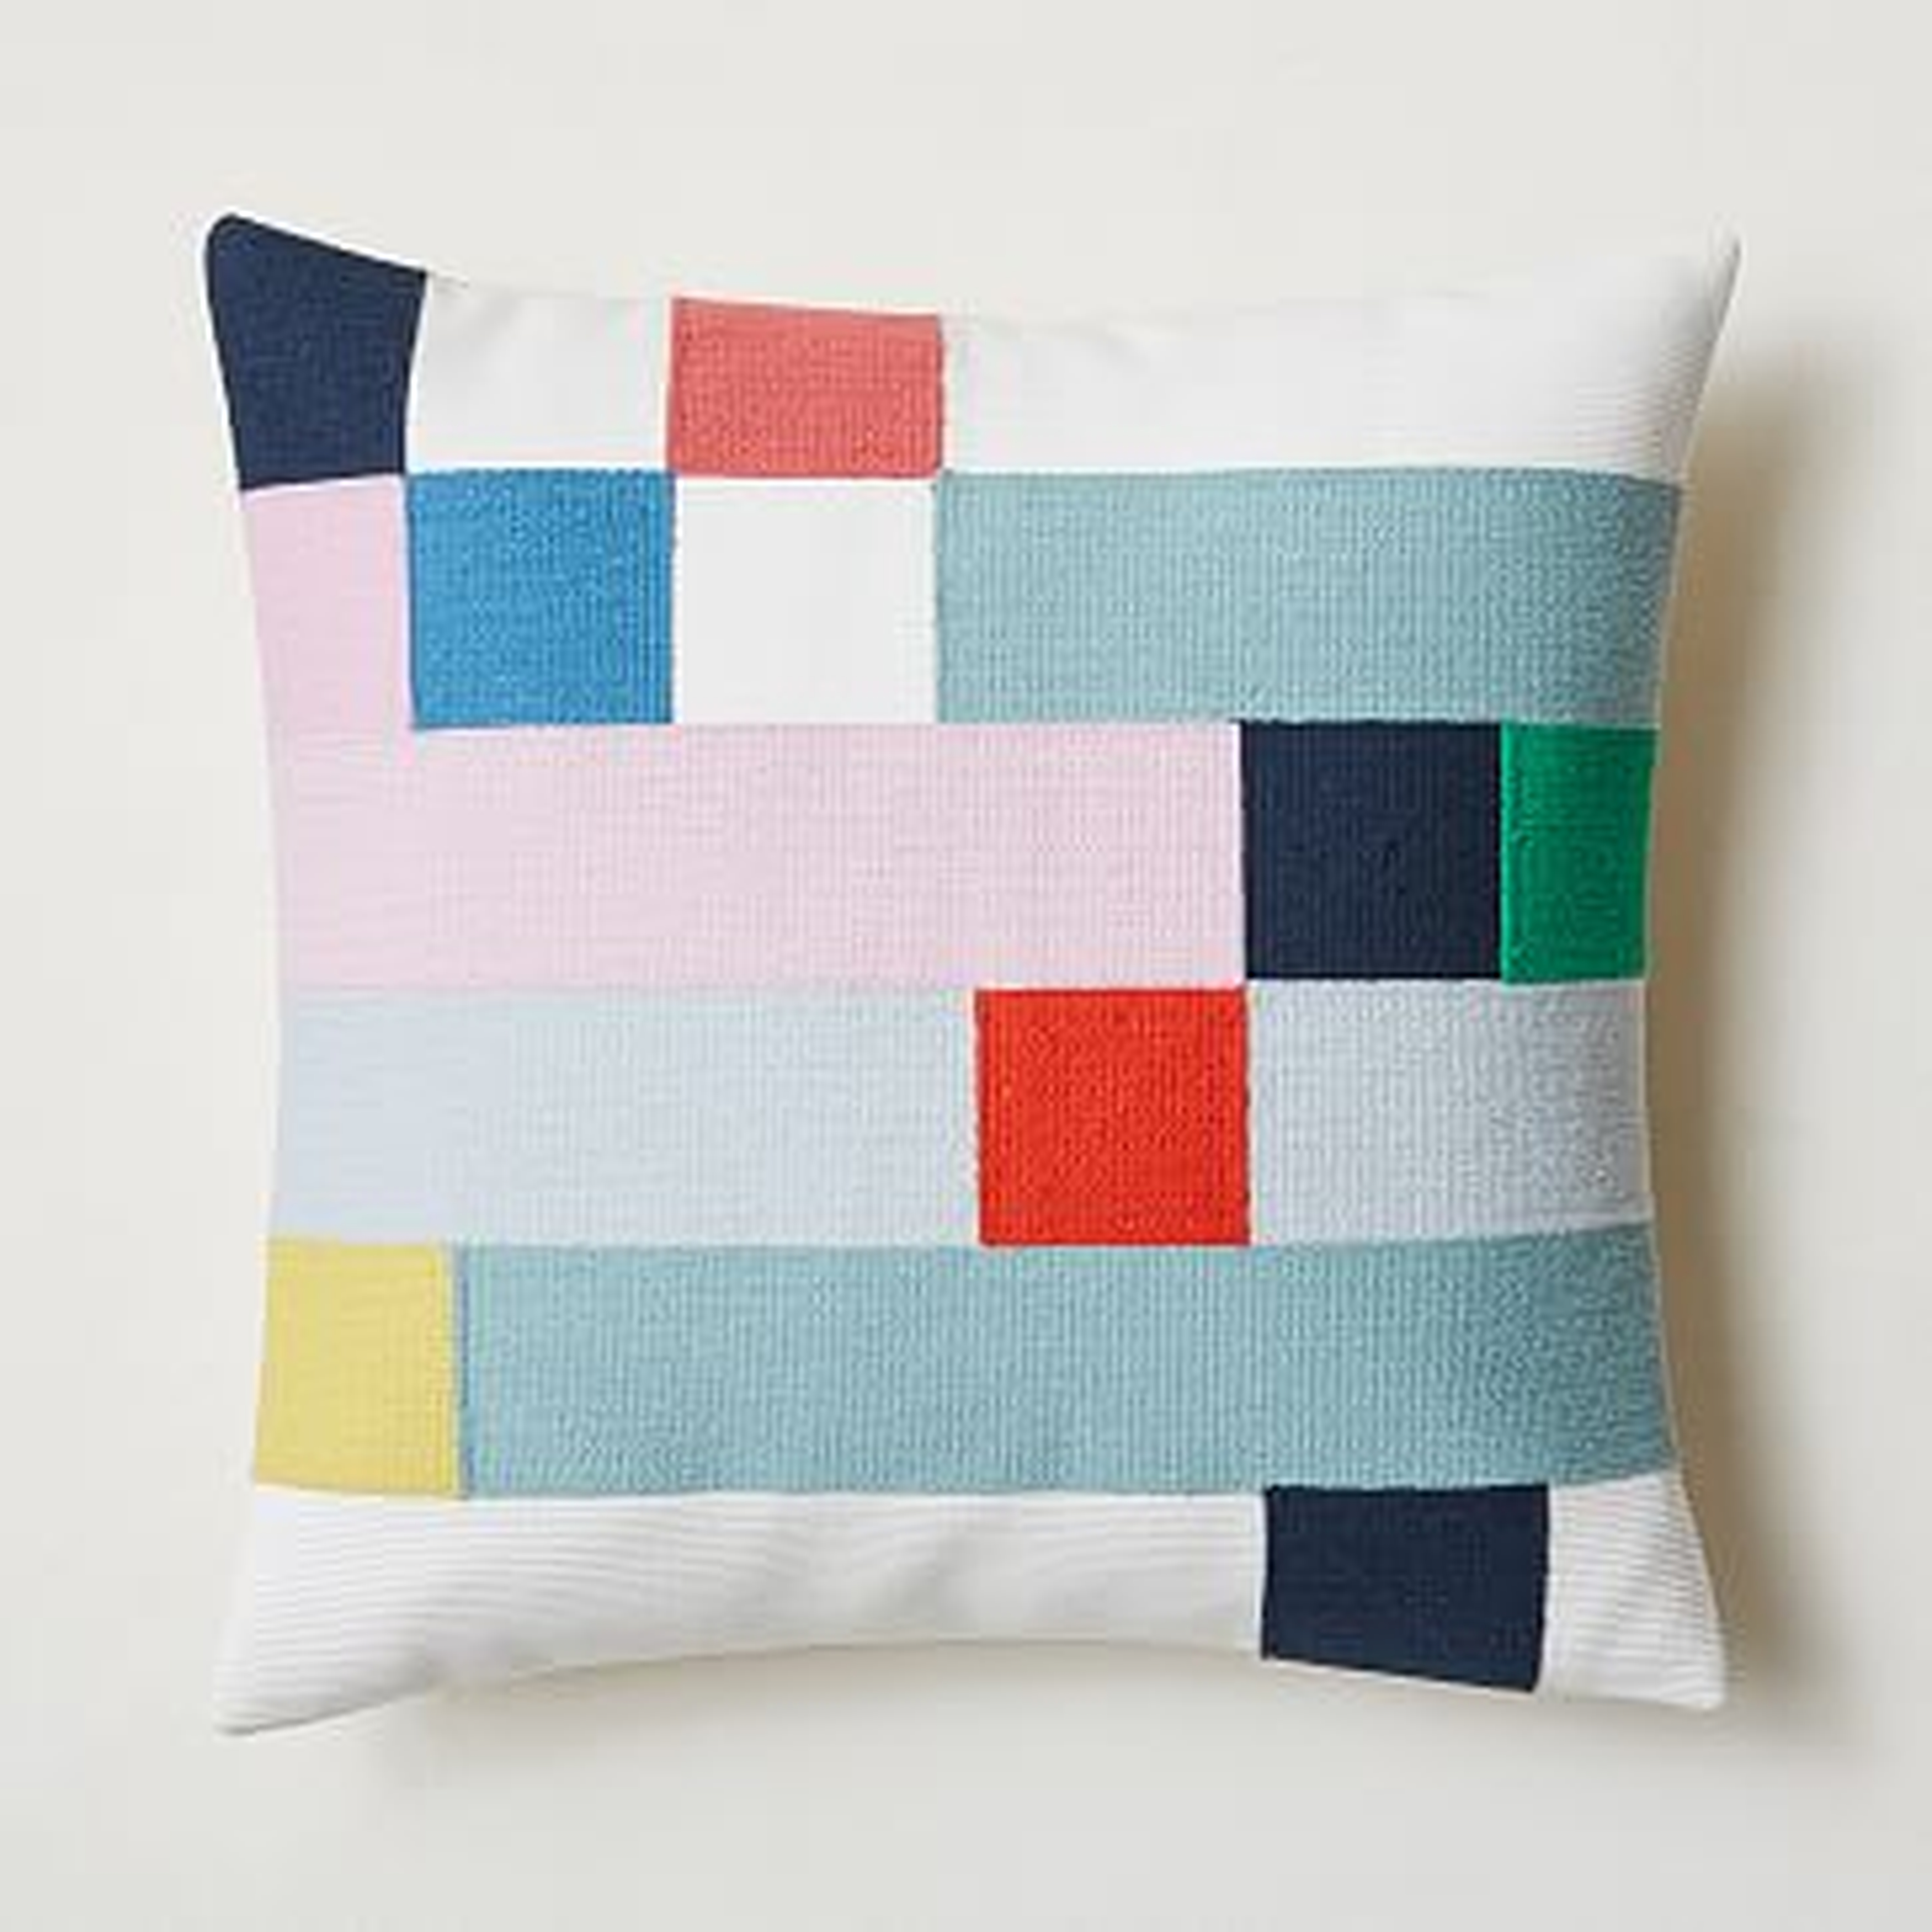 Margo Selby Mix Squares Pillow Cover, 20"x20", Stone White - West Elm